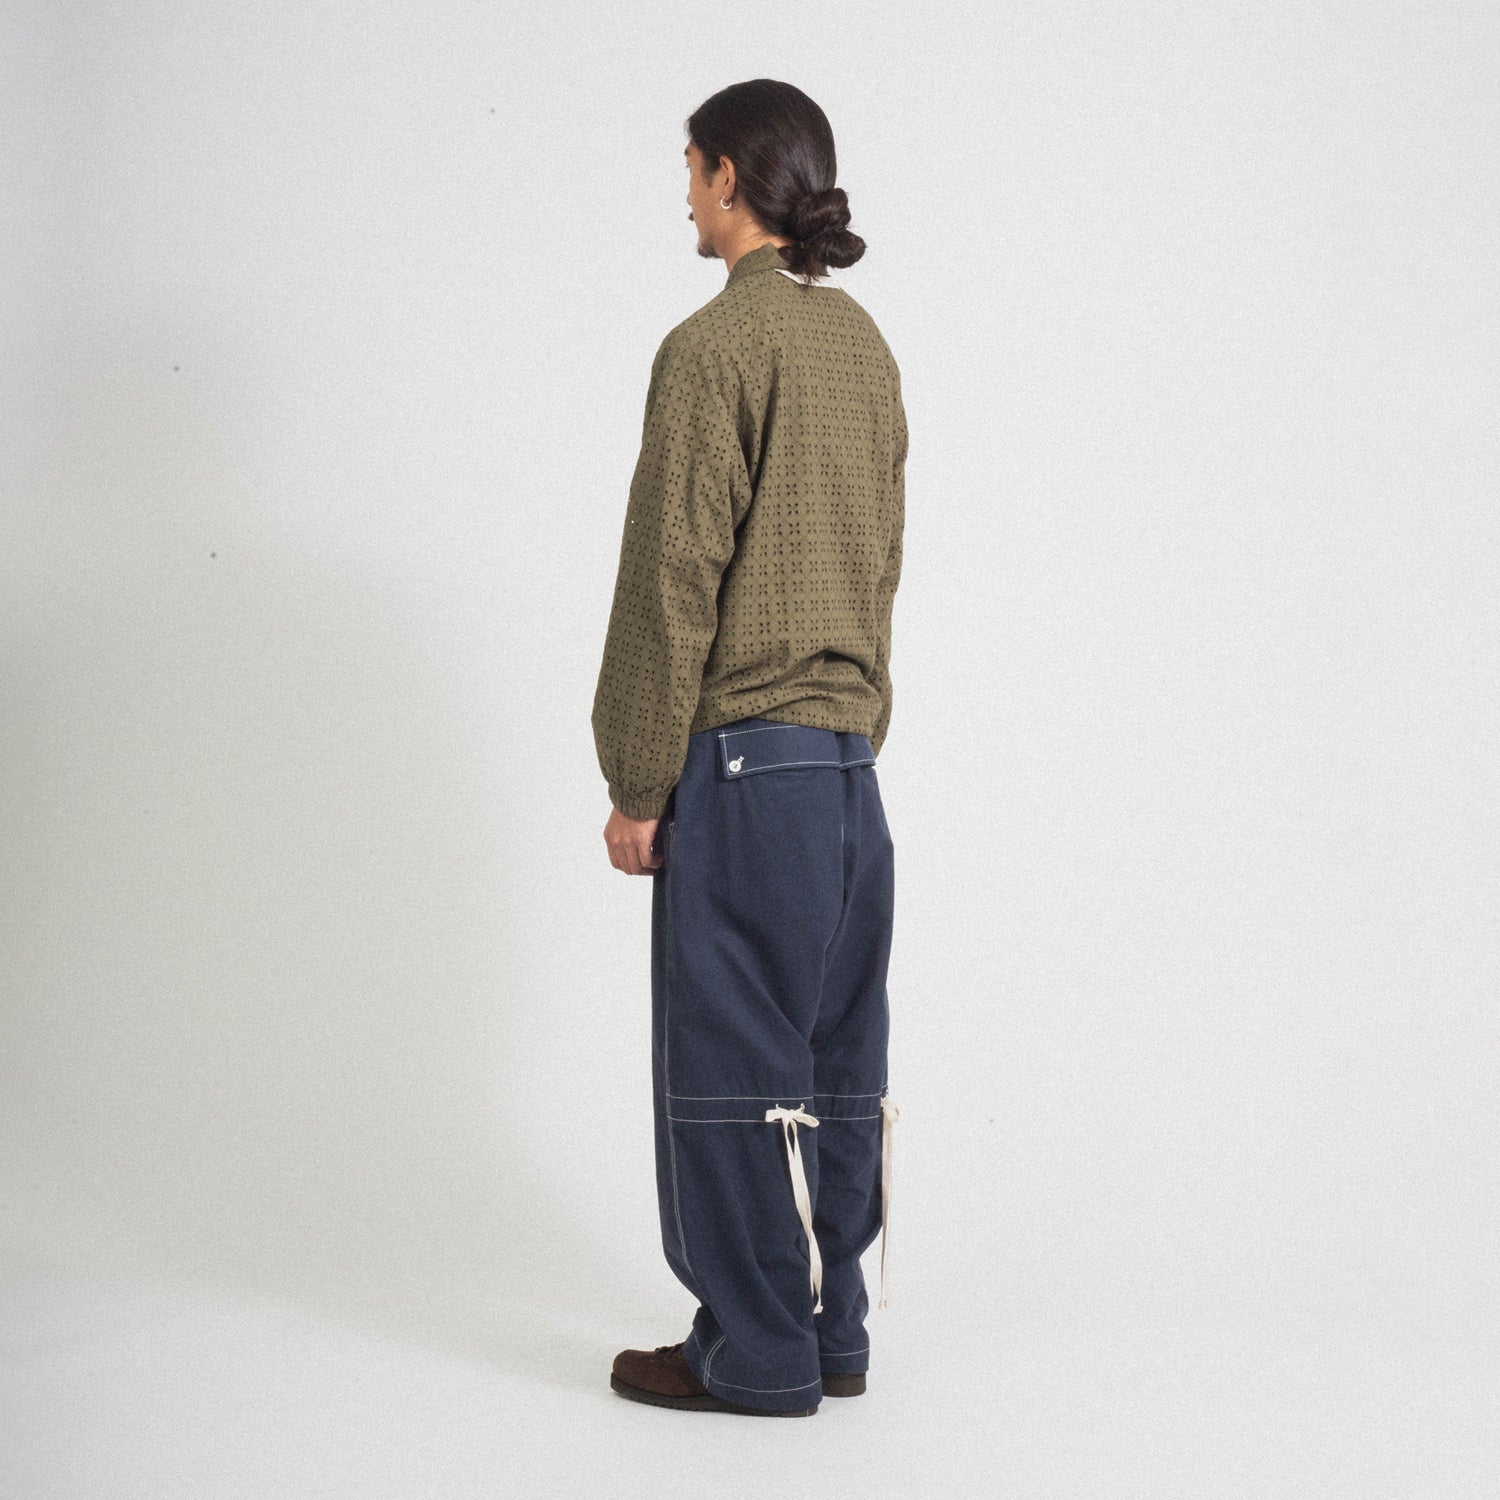 [MERELY MADE] HMONG WORKERS PANTS _ DENIM BLUE